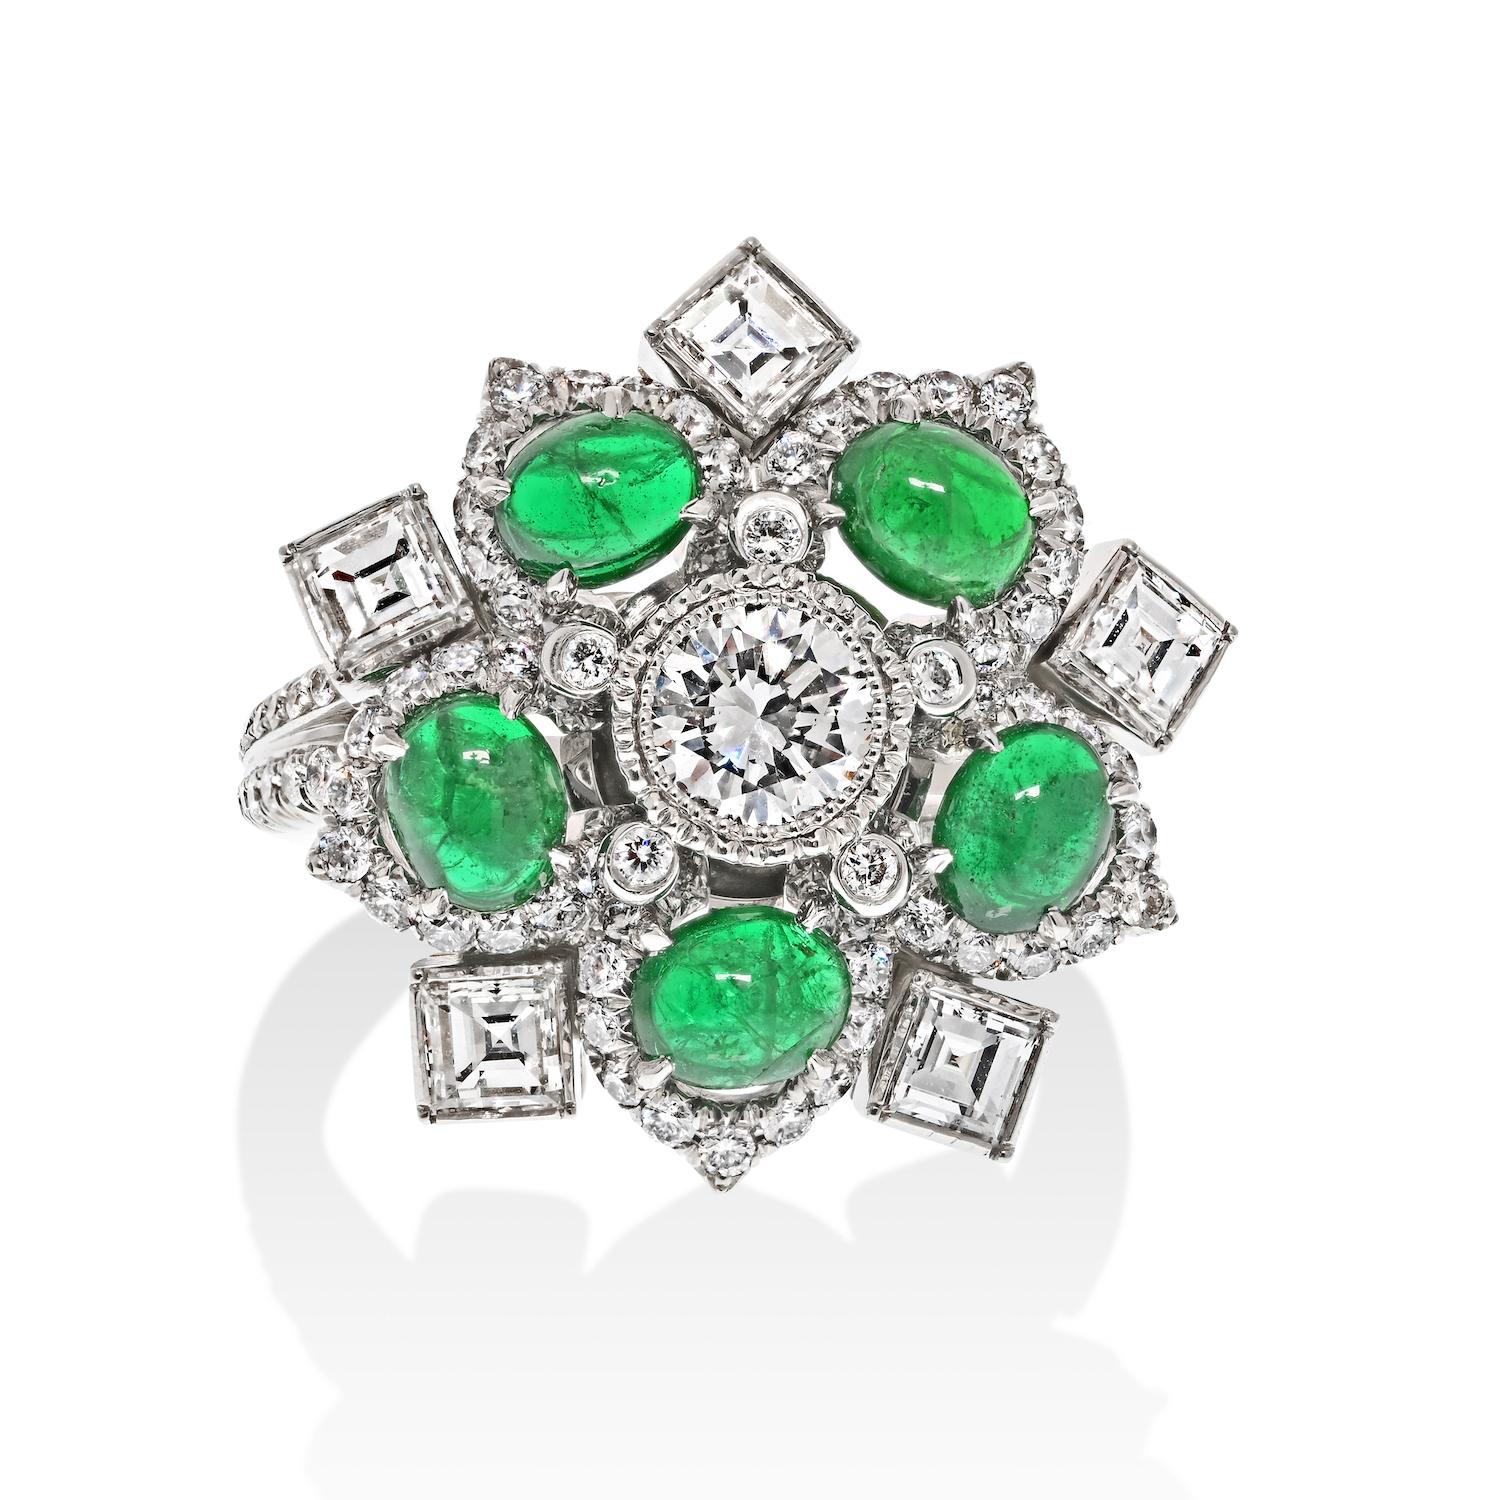 Elegance in Bloom: The Handmade Platinum Entourage Diamond and Cabochon Cut Green Emerald Ring.

Behold the exquisite charm of this handmade platinum ring, a captivating blend of diamonds and cabochon-cut green emeralds, all woven into a delightful